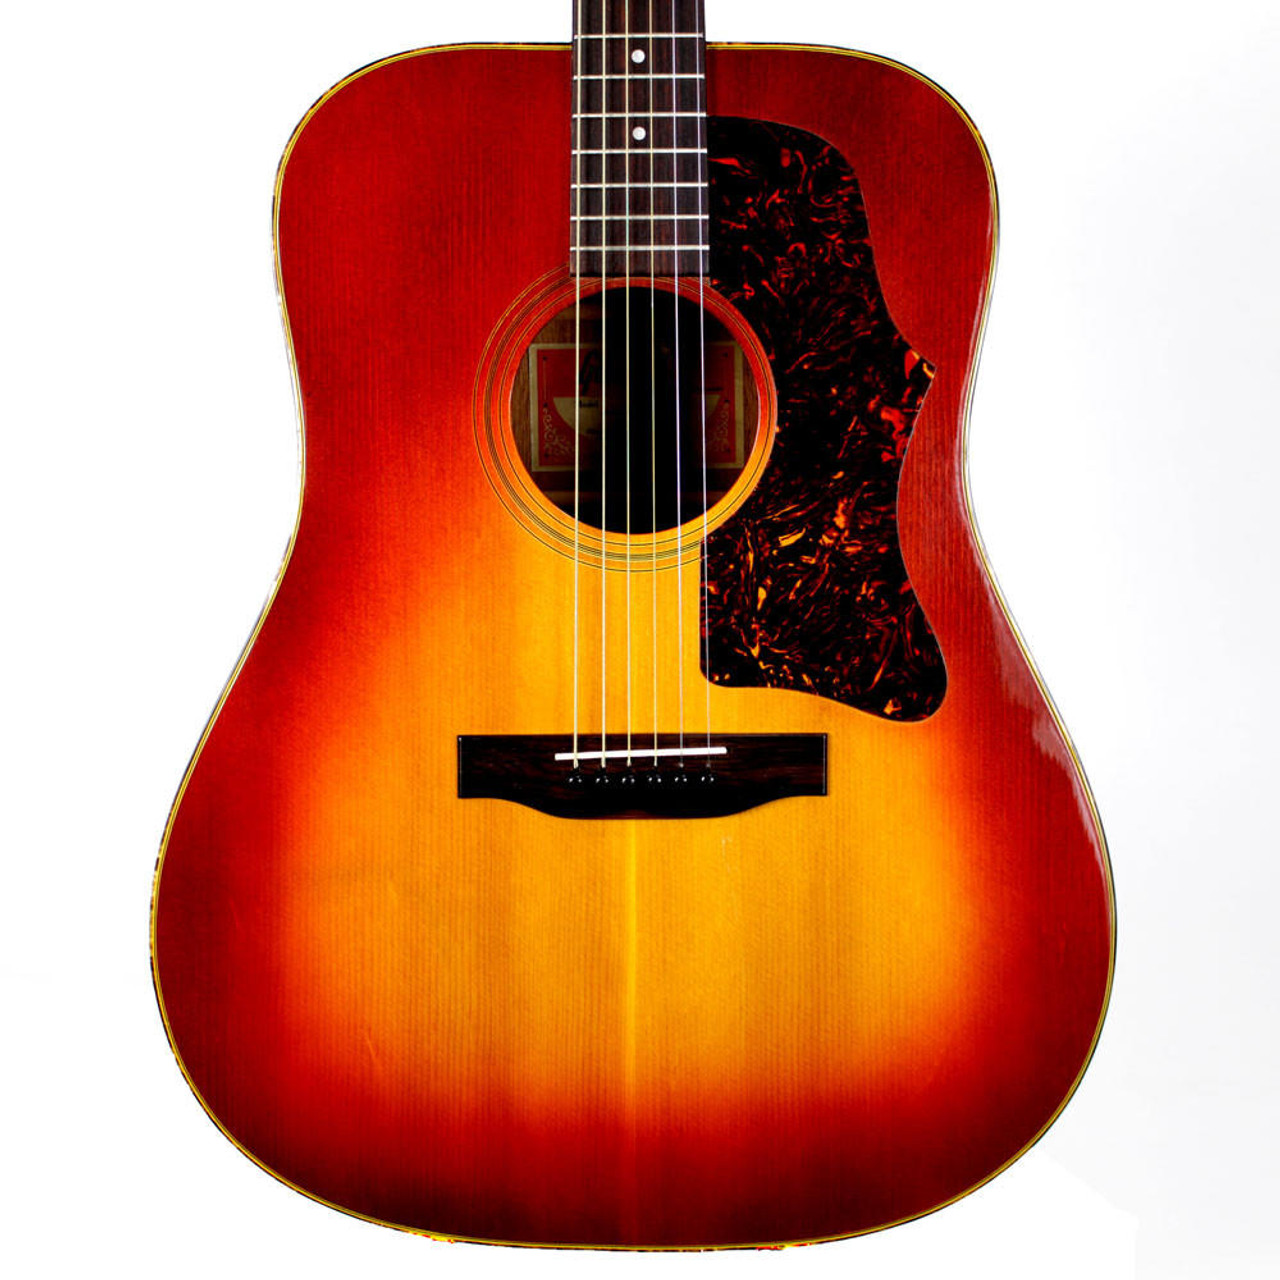 1975 Vintage Gibson J-45 Deluxe Acoustic Guitar